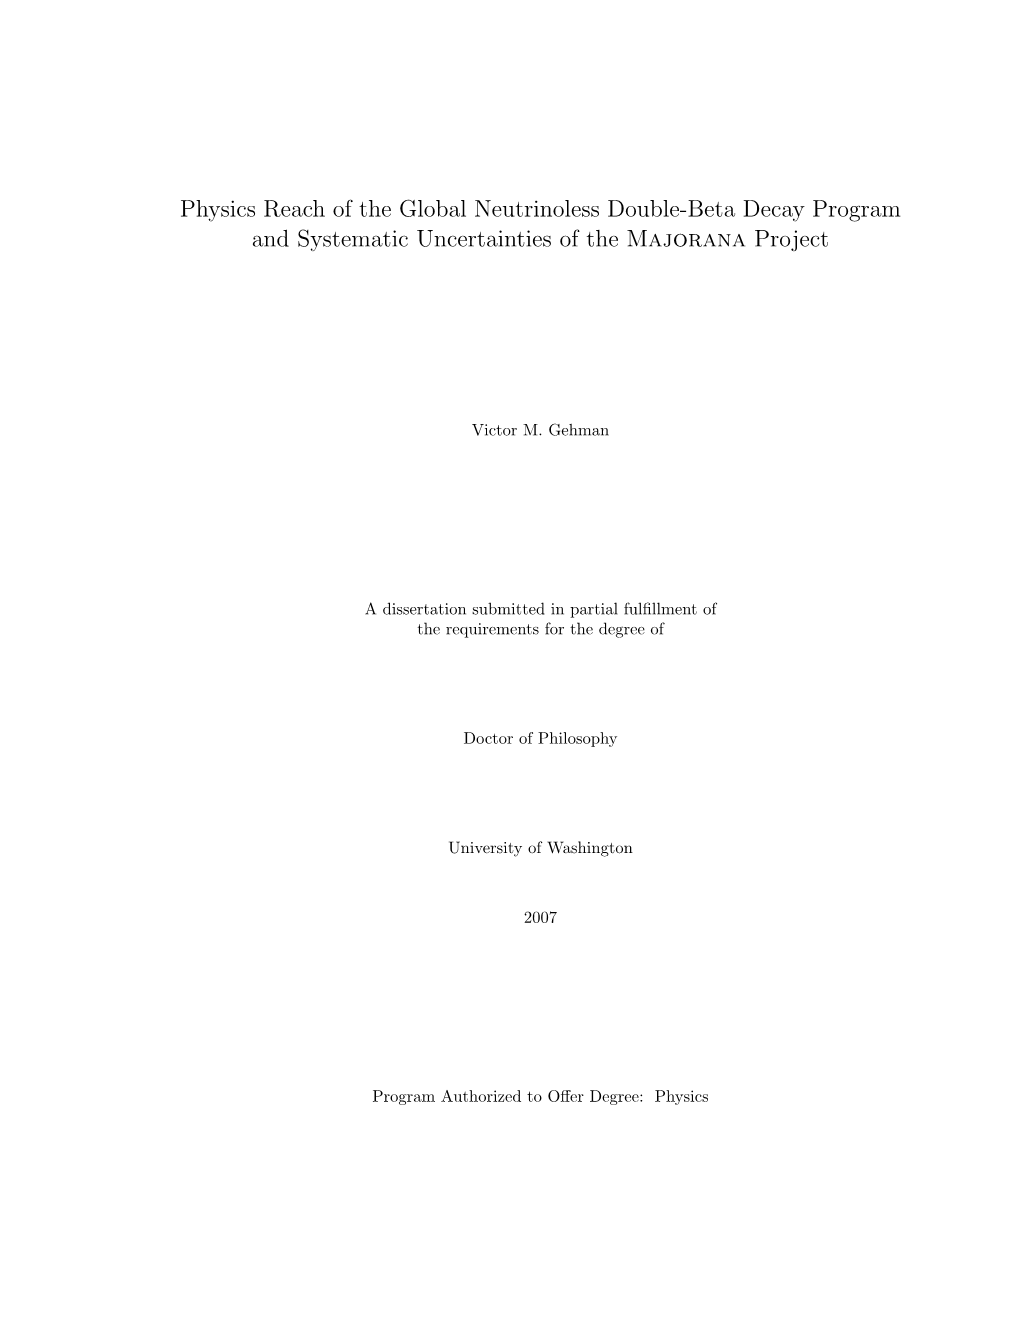 Physics Reach of the Global Neutrinoless Double-Beta Decay Program and Systematic Uncertainties of the Majorana Project